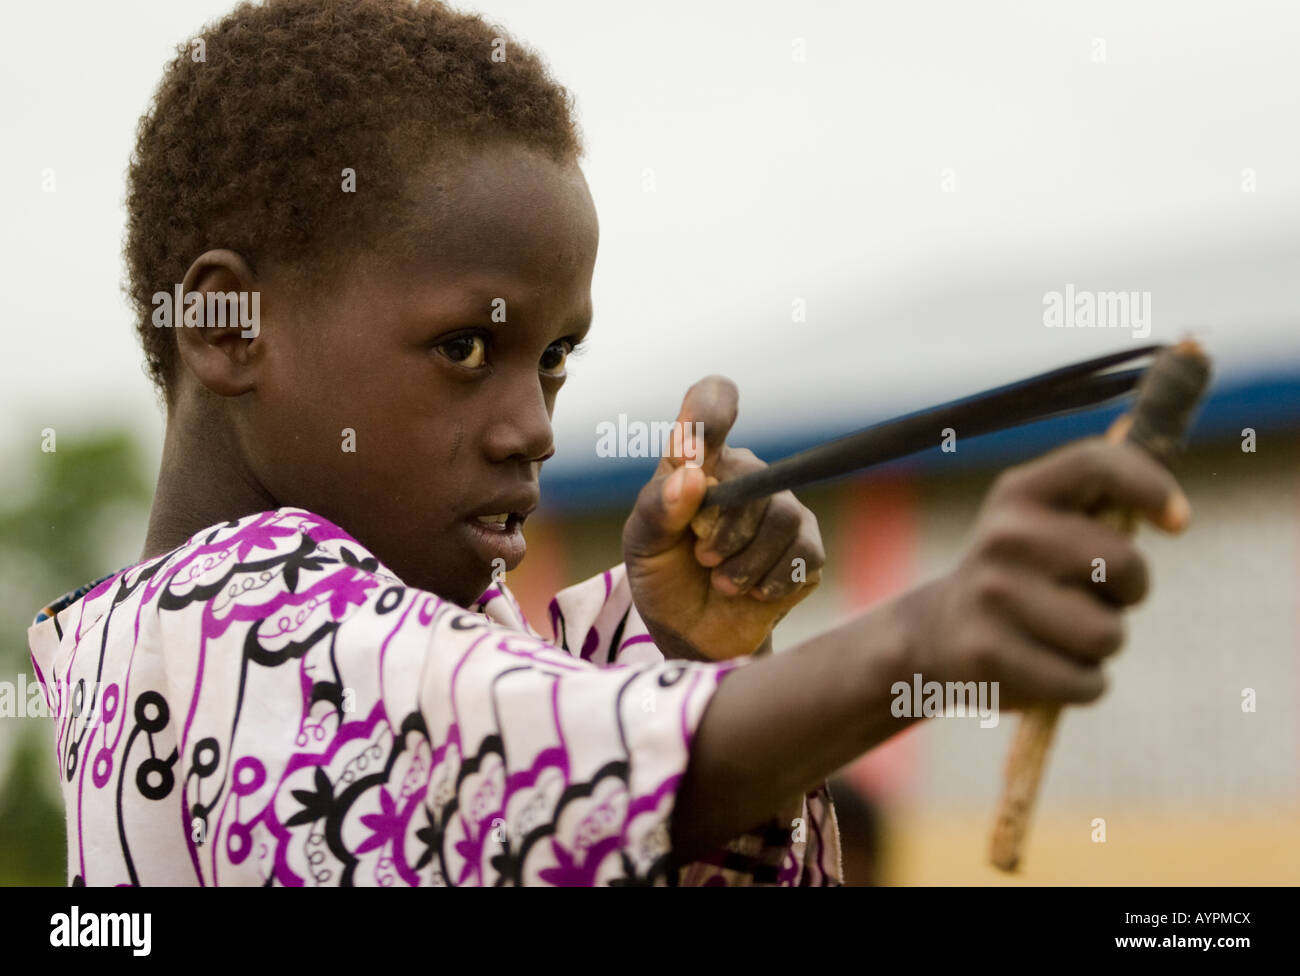 A boy plays with a sling shot, Ghana, Africa Stock Photo